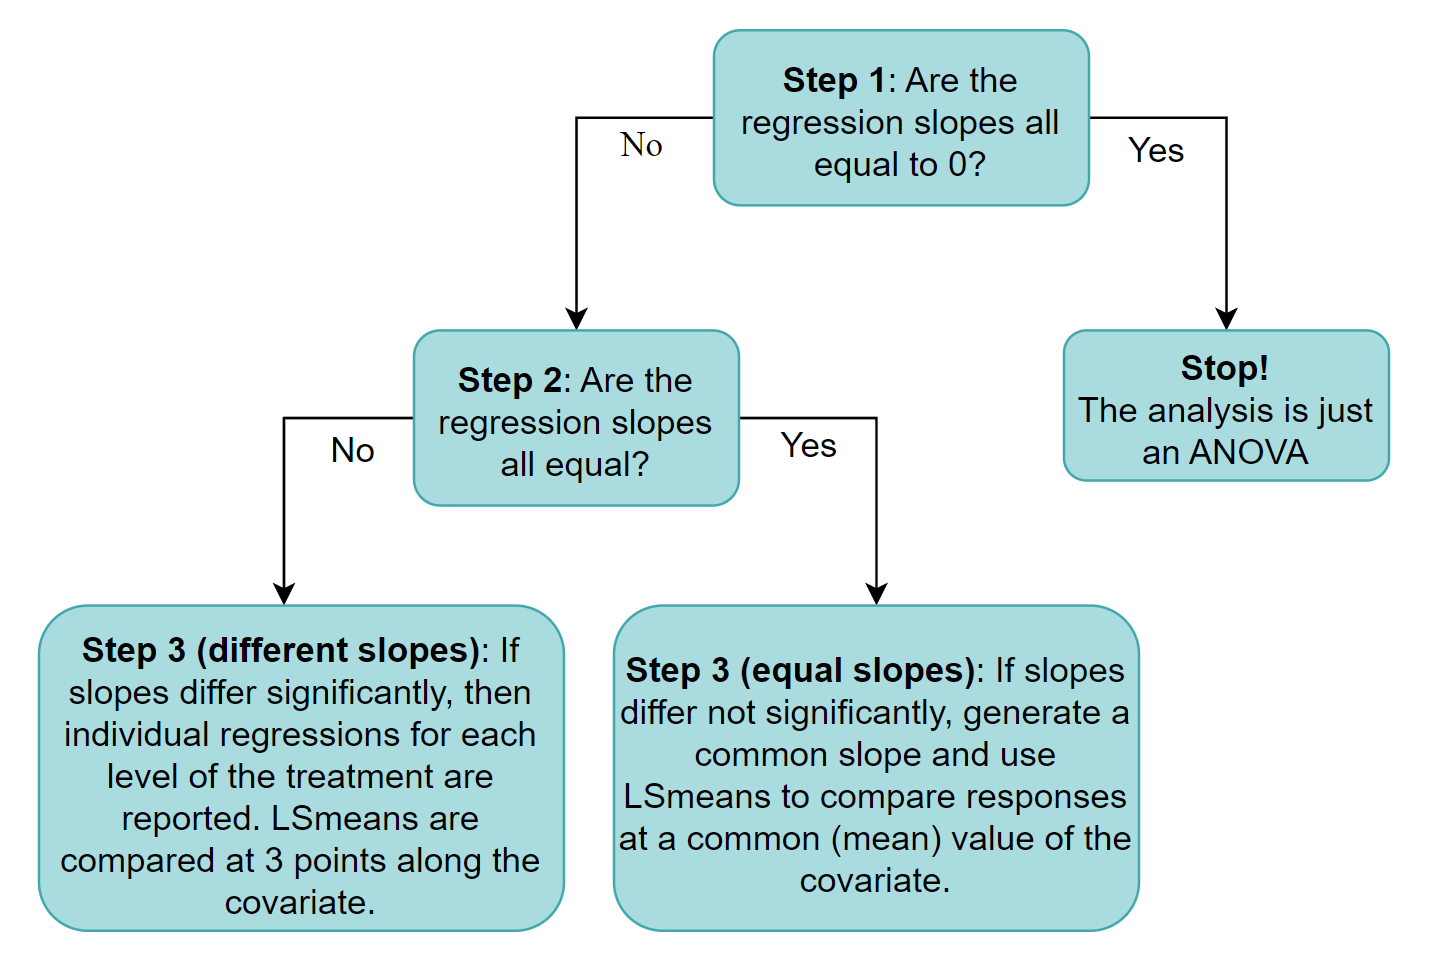 Flowchart: if all regression slopes equal 0, the analysis is just an ANOVA. If not, the treatment depends on whether the slopes are generally equal or significantly different.